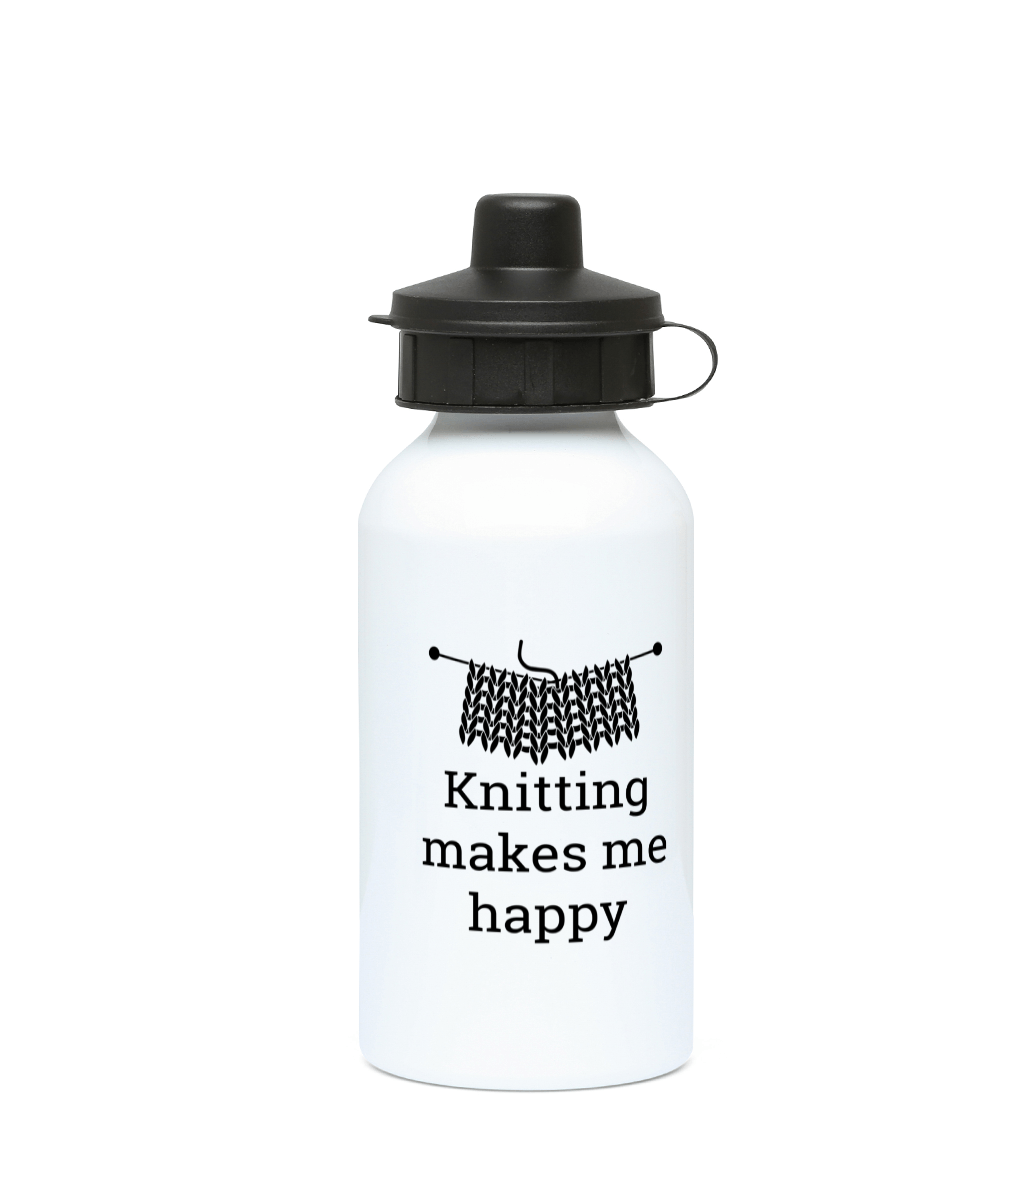 water bottle 400ml knitting makes me happy with knitting image